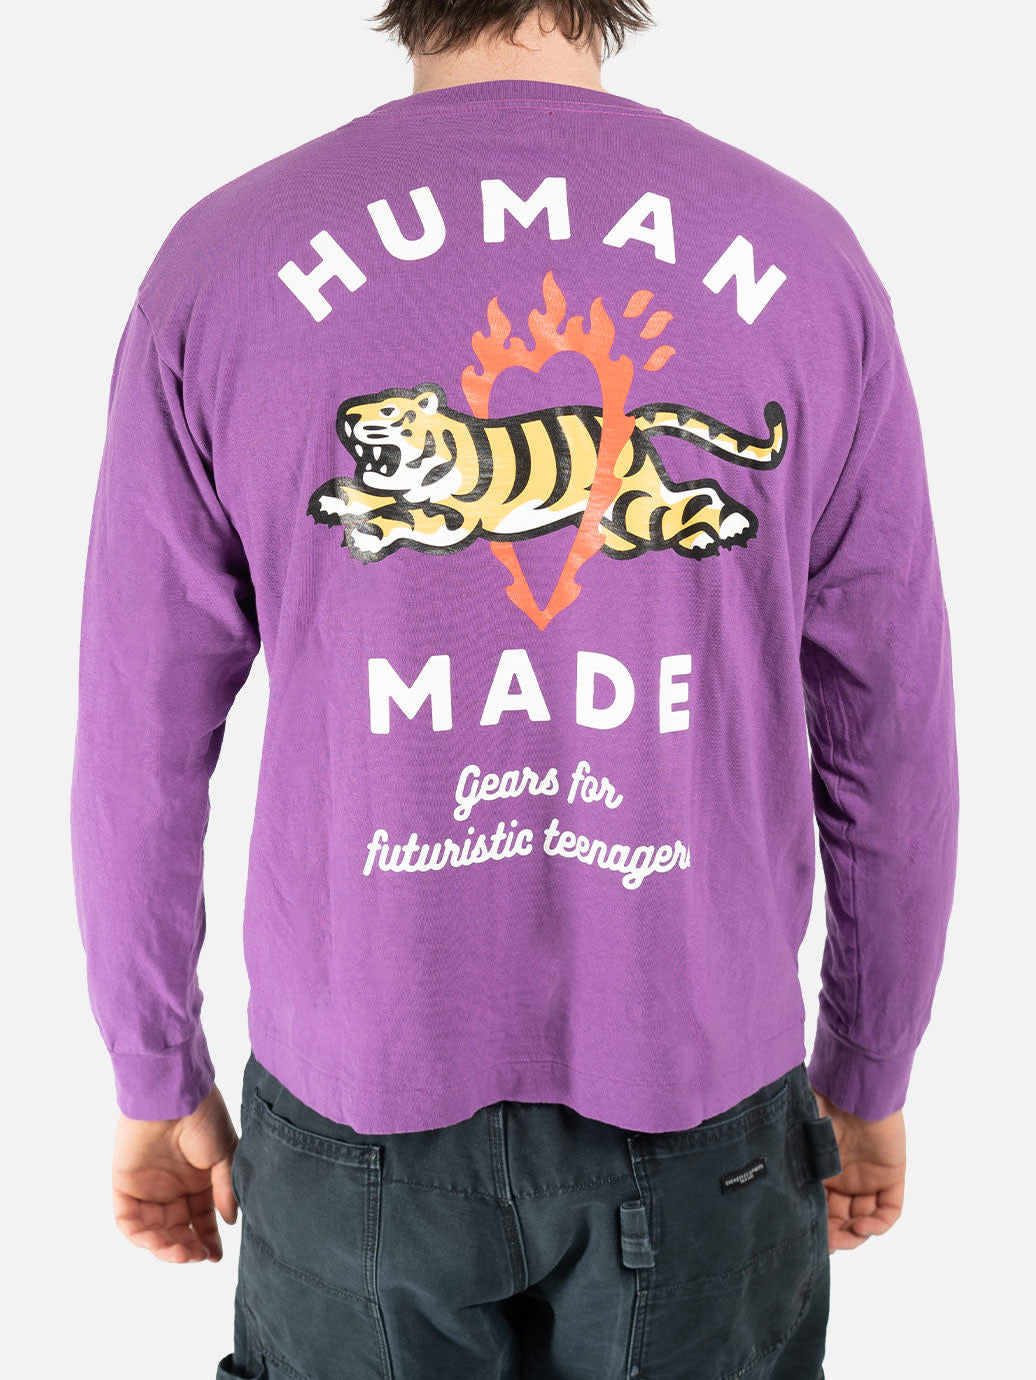 Human Made Graphic L/S T-Shirt #3 – OALLERY